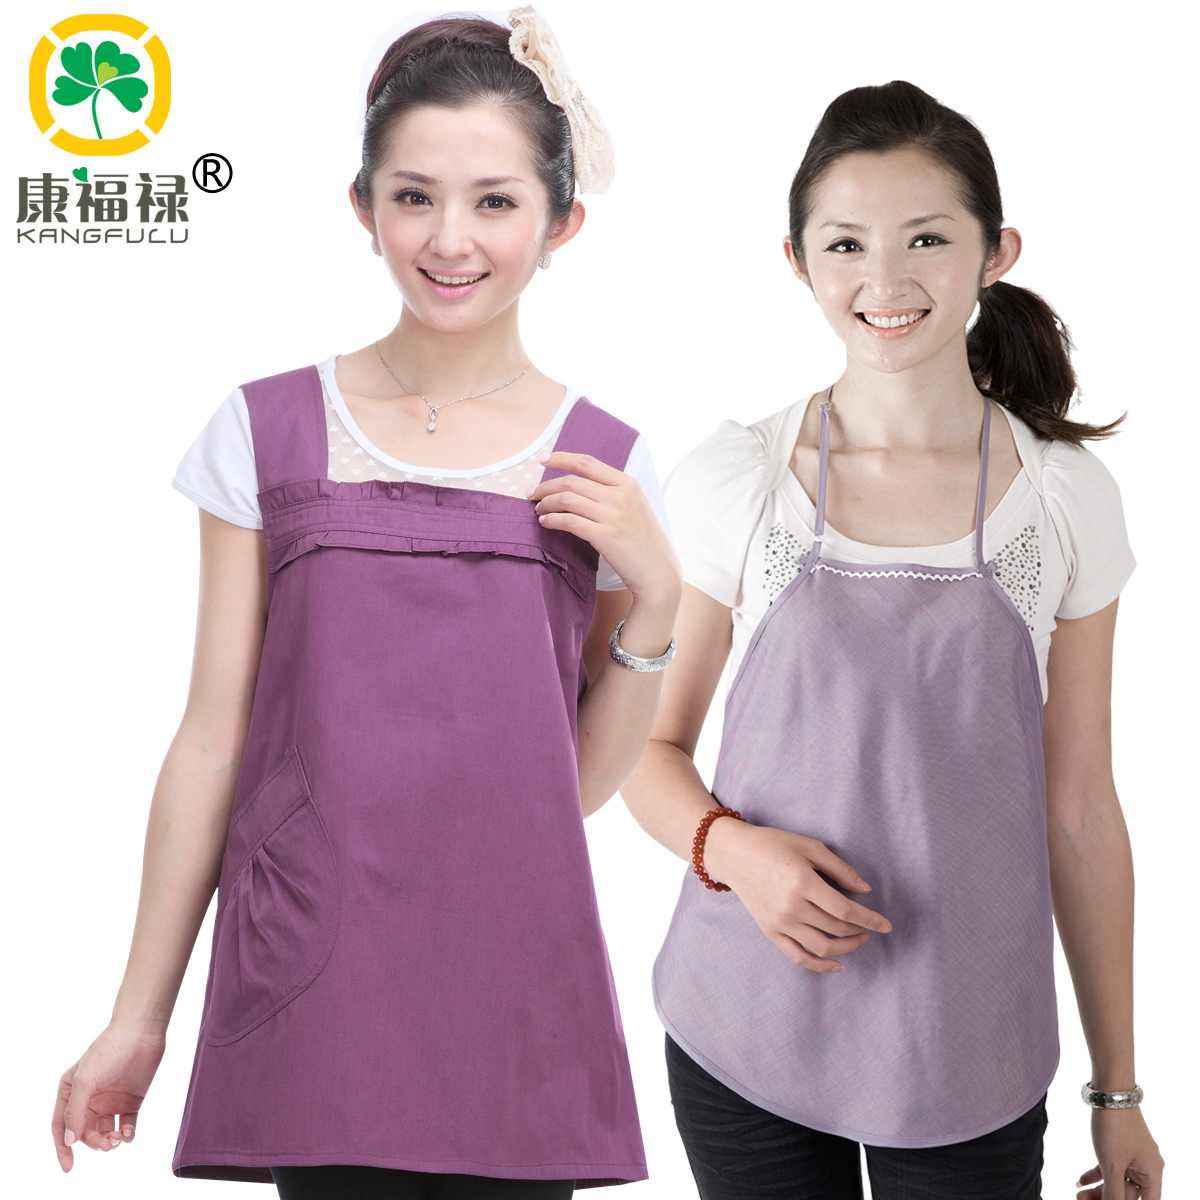 Radiation-resistant maternity clothing silver fiber maternity radiation-resistant clothing clothes 302a